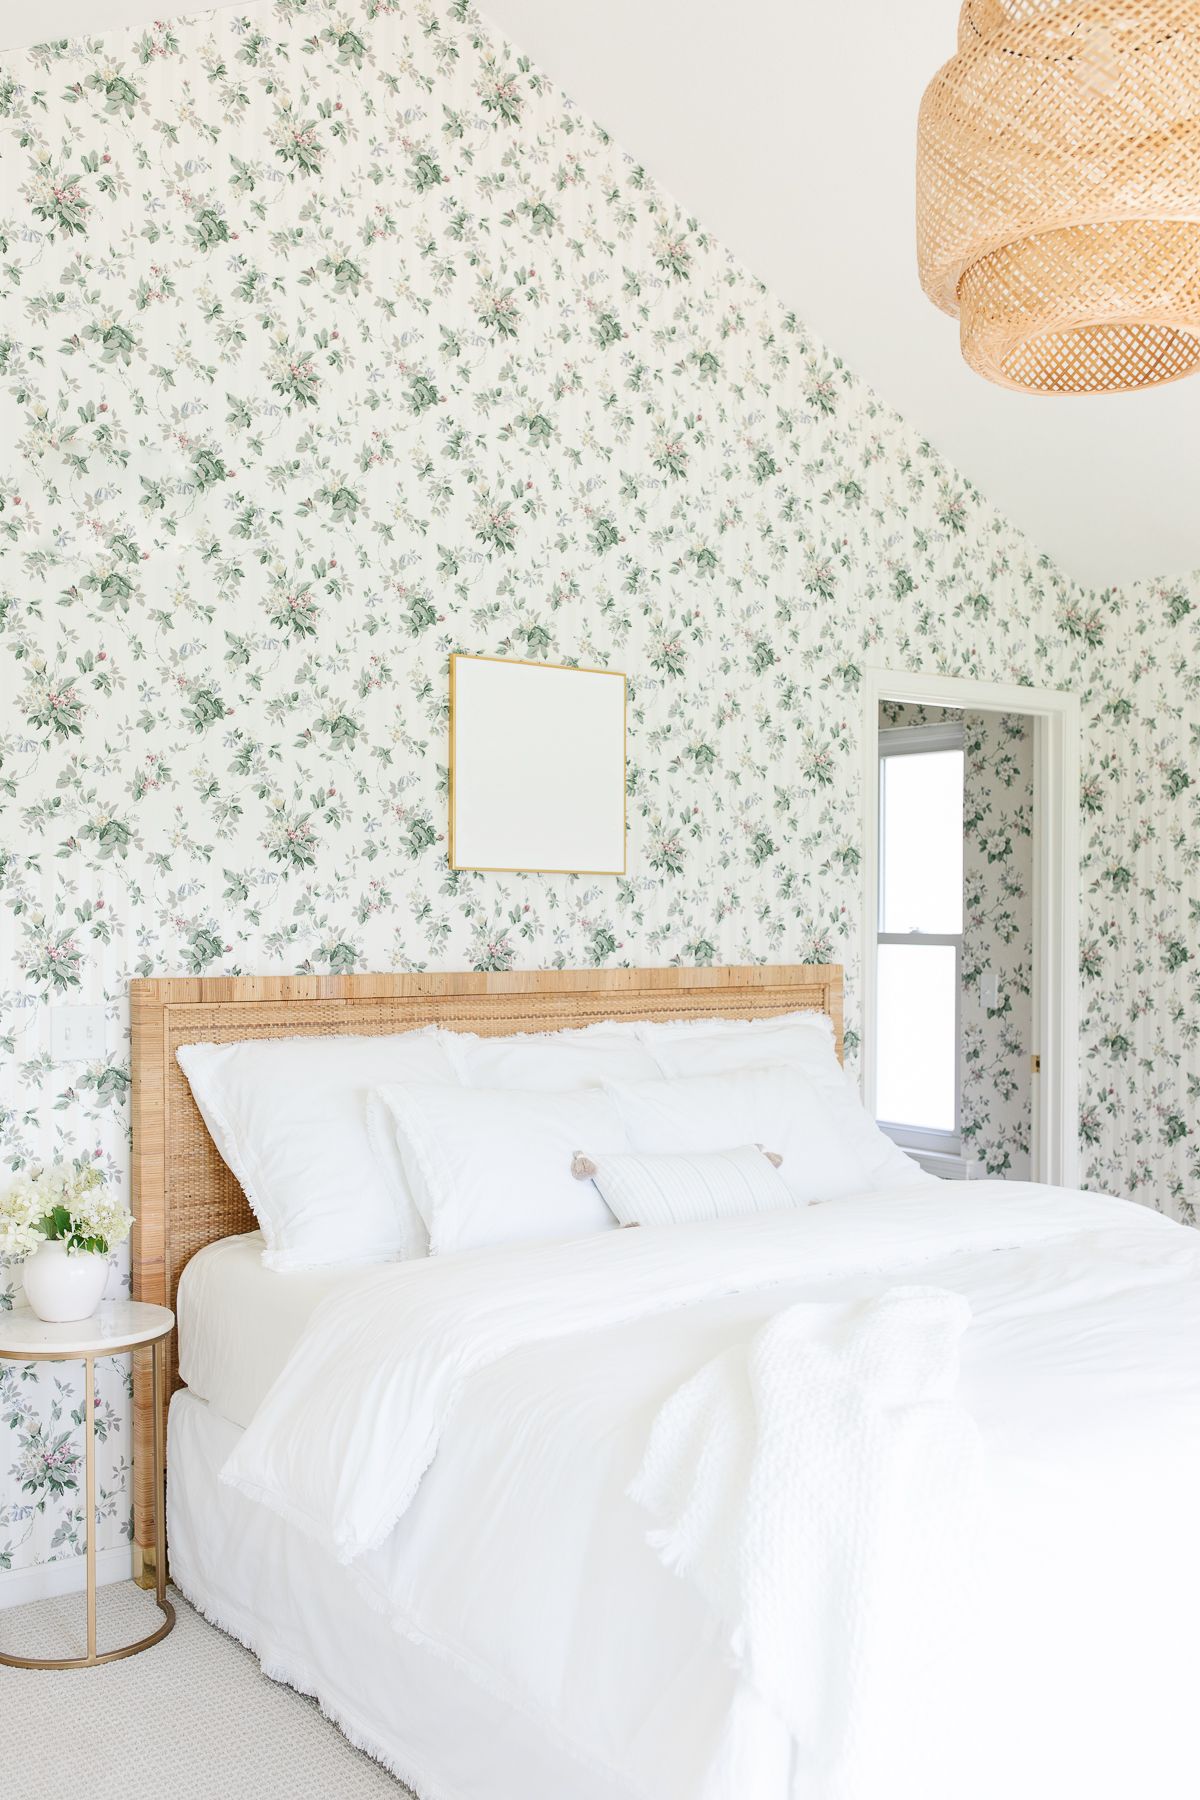 A wallpapered bedroom with white art over bed